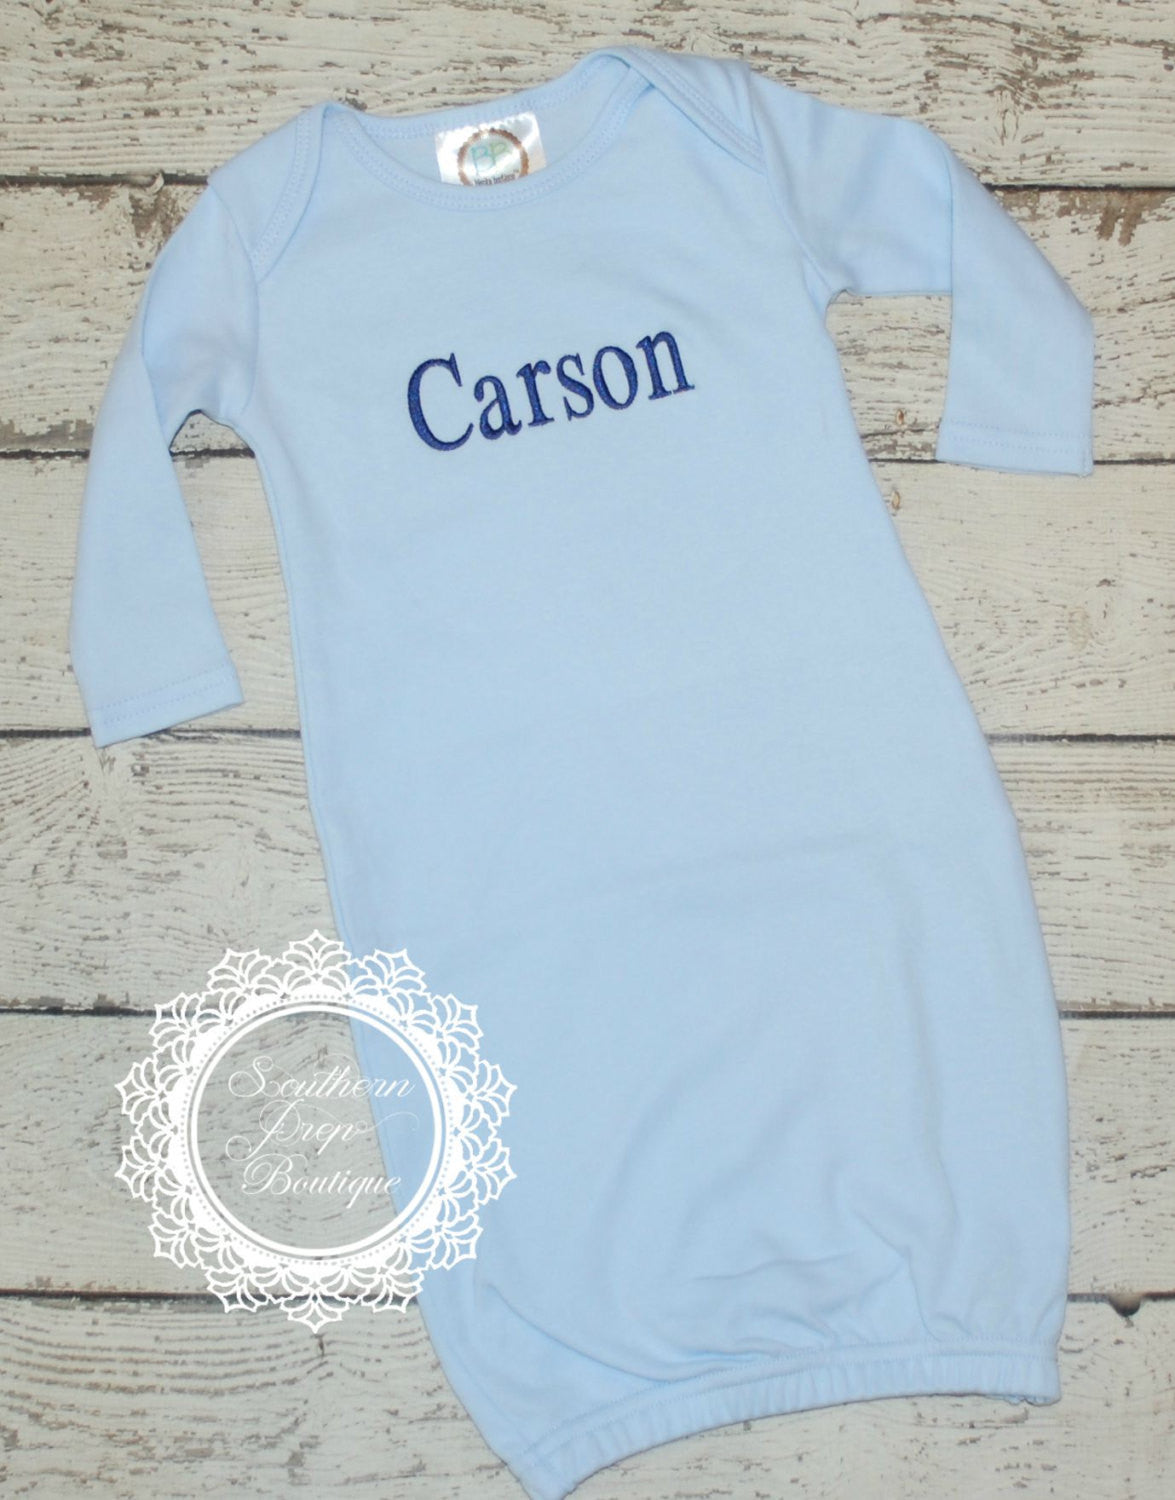 Monogrammed Baby Gown or Onesie - Name or Monogram on Gown - Baby Shower Gift - Personalized Baby Gift